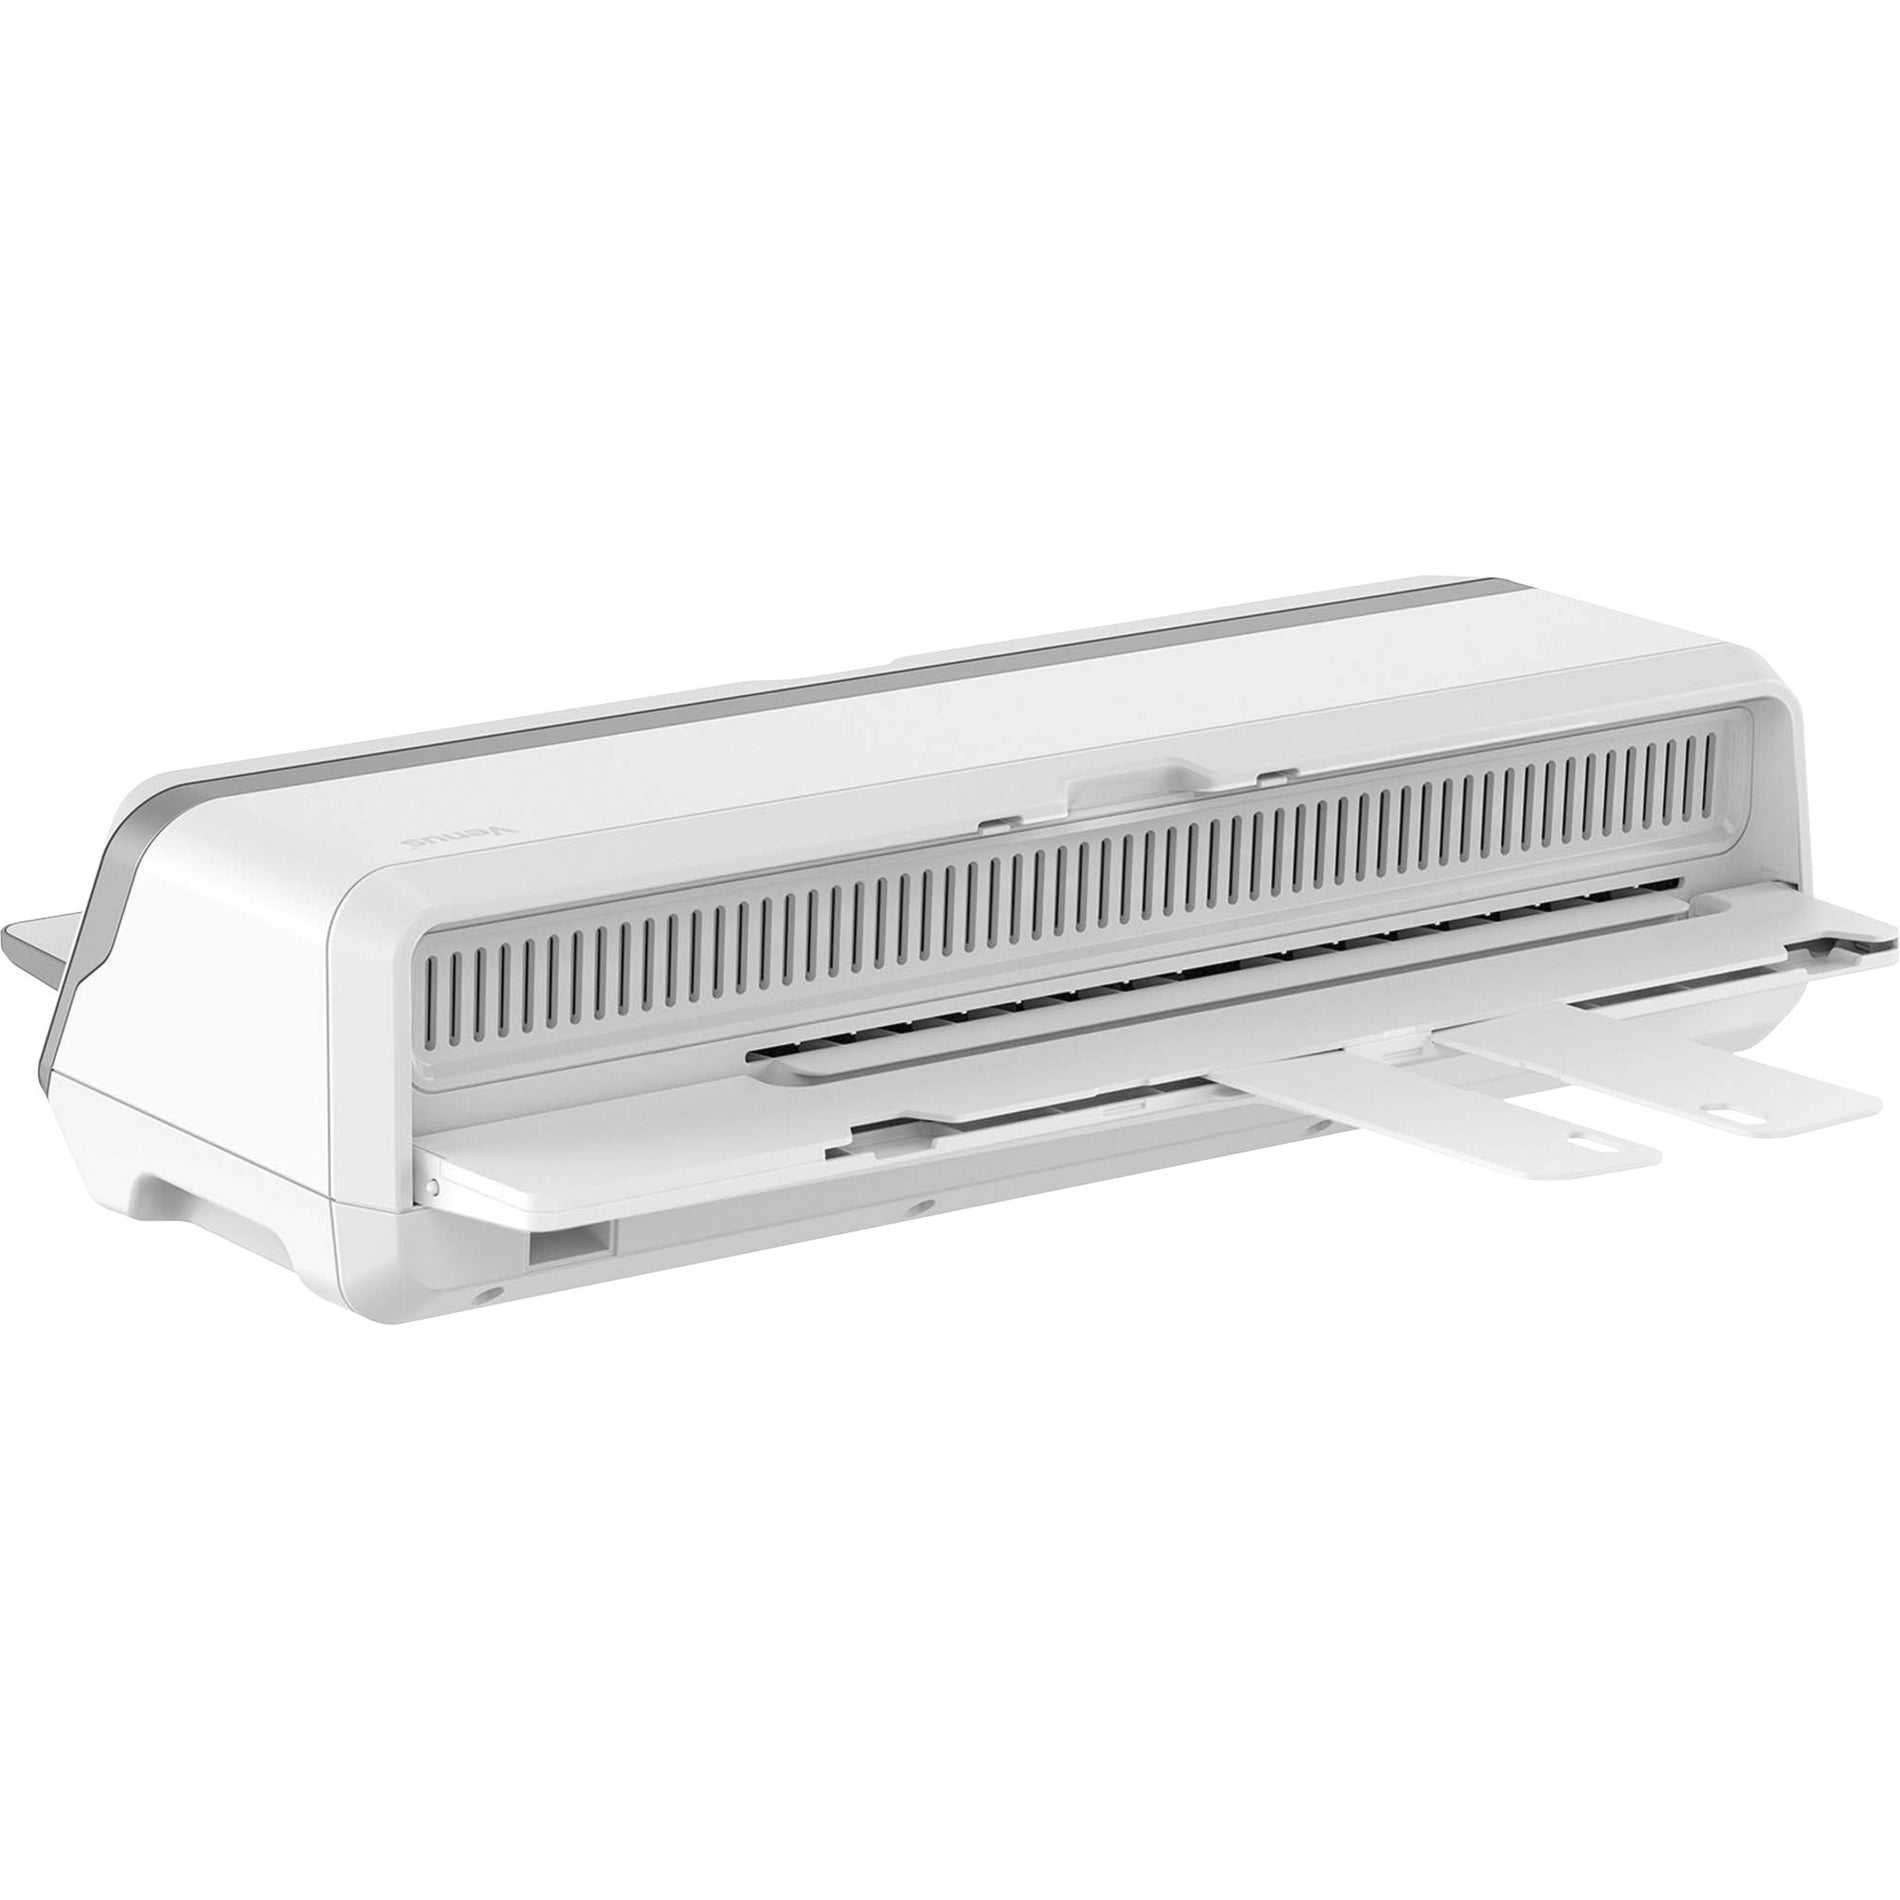 Fellowes 5746101 Venus 125 Laminator, Office Use, 7.2 ft/min Speed, Hot/Cold Processing